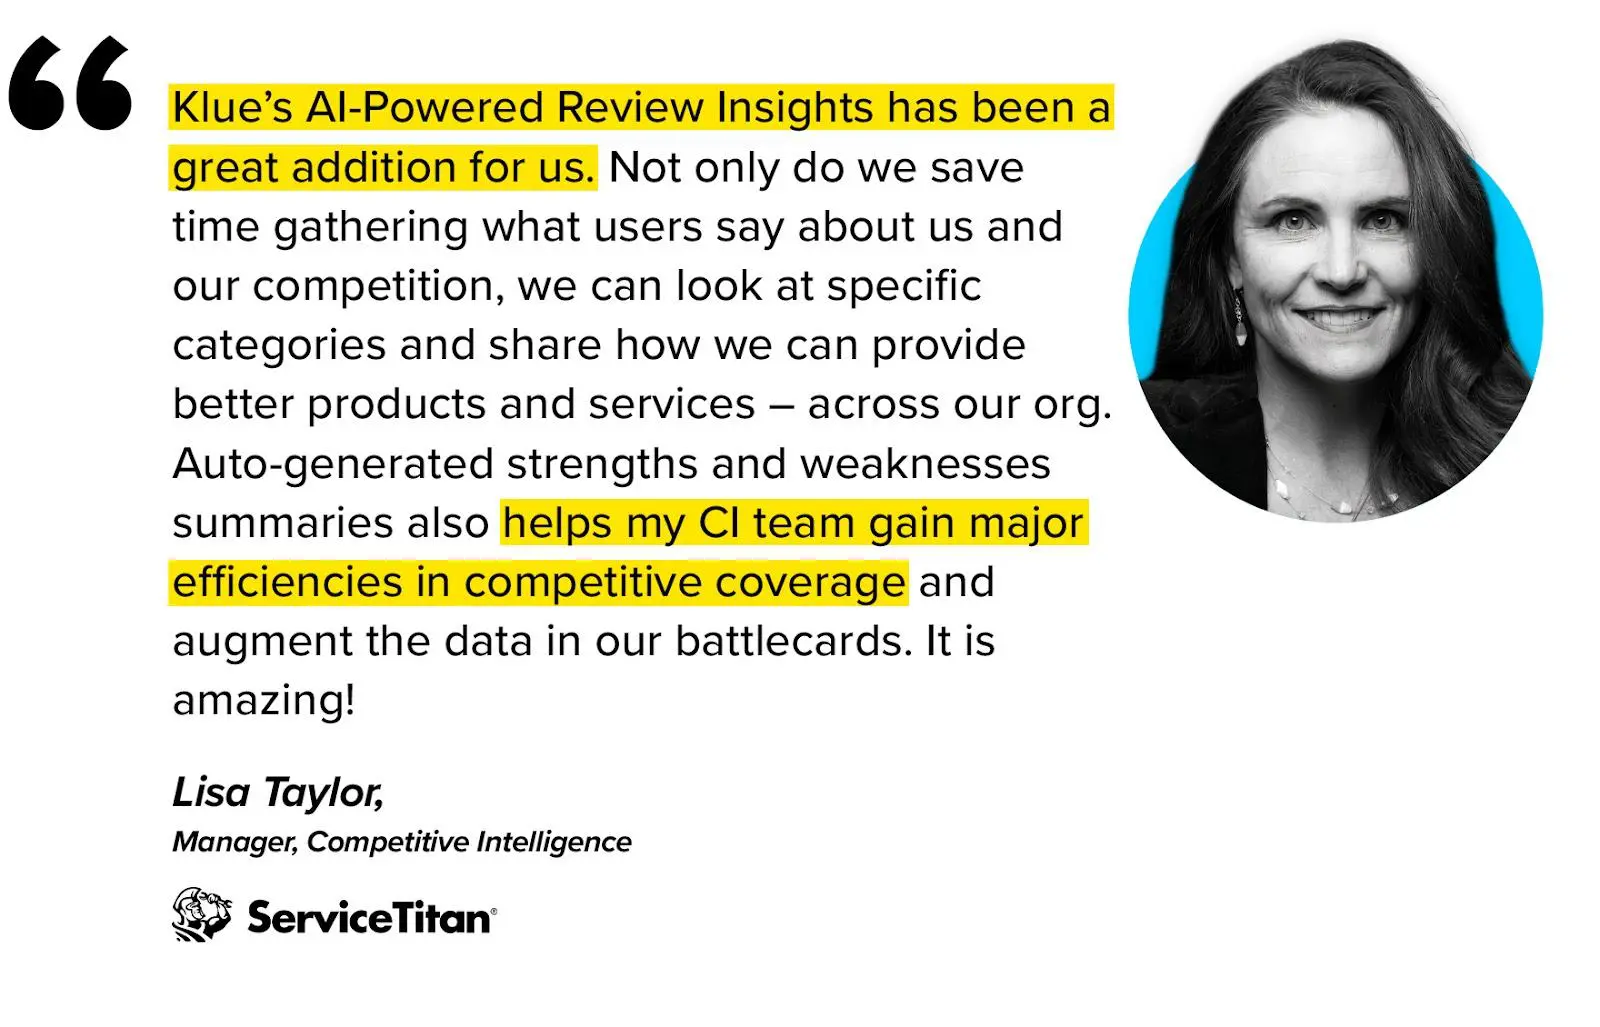 How Klue's AI powered competitive intelligence helps Lisa Taylor understand her competitors' strengths and weaknesses more efficiently.